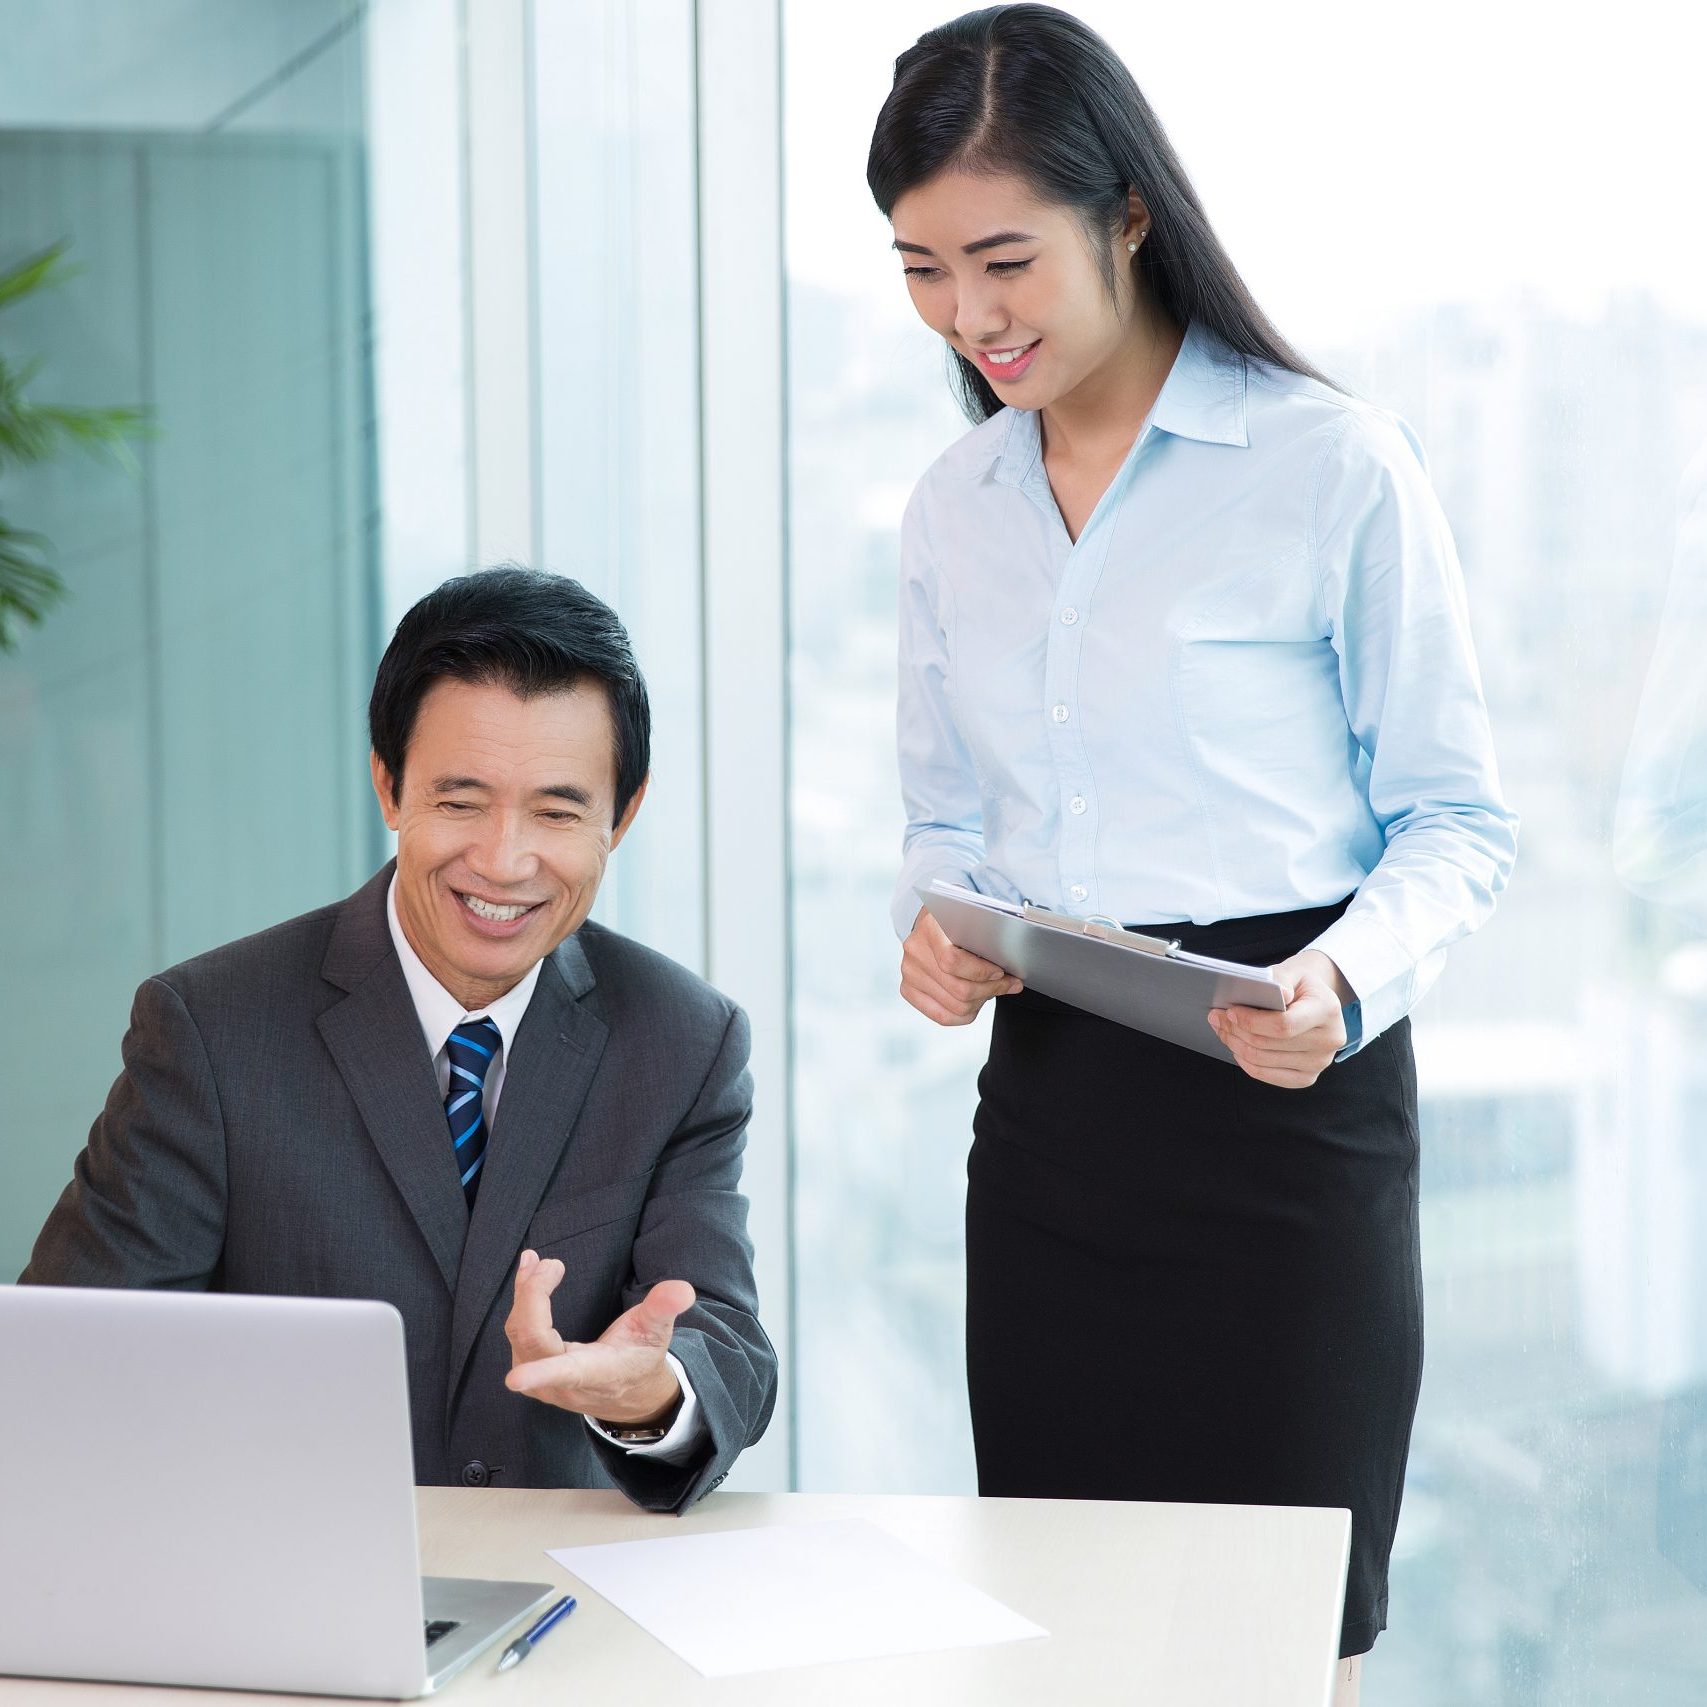 Smiling Asian senior business man pointing to laptop screen and sitting at desk while talking to female assistant standing near in office with window and blurred city view outside in background